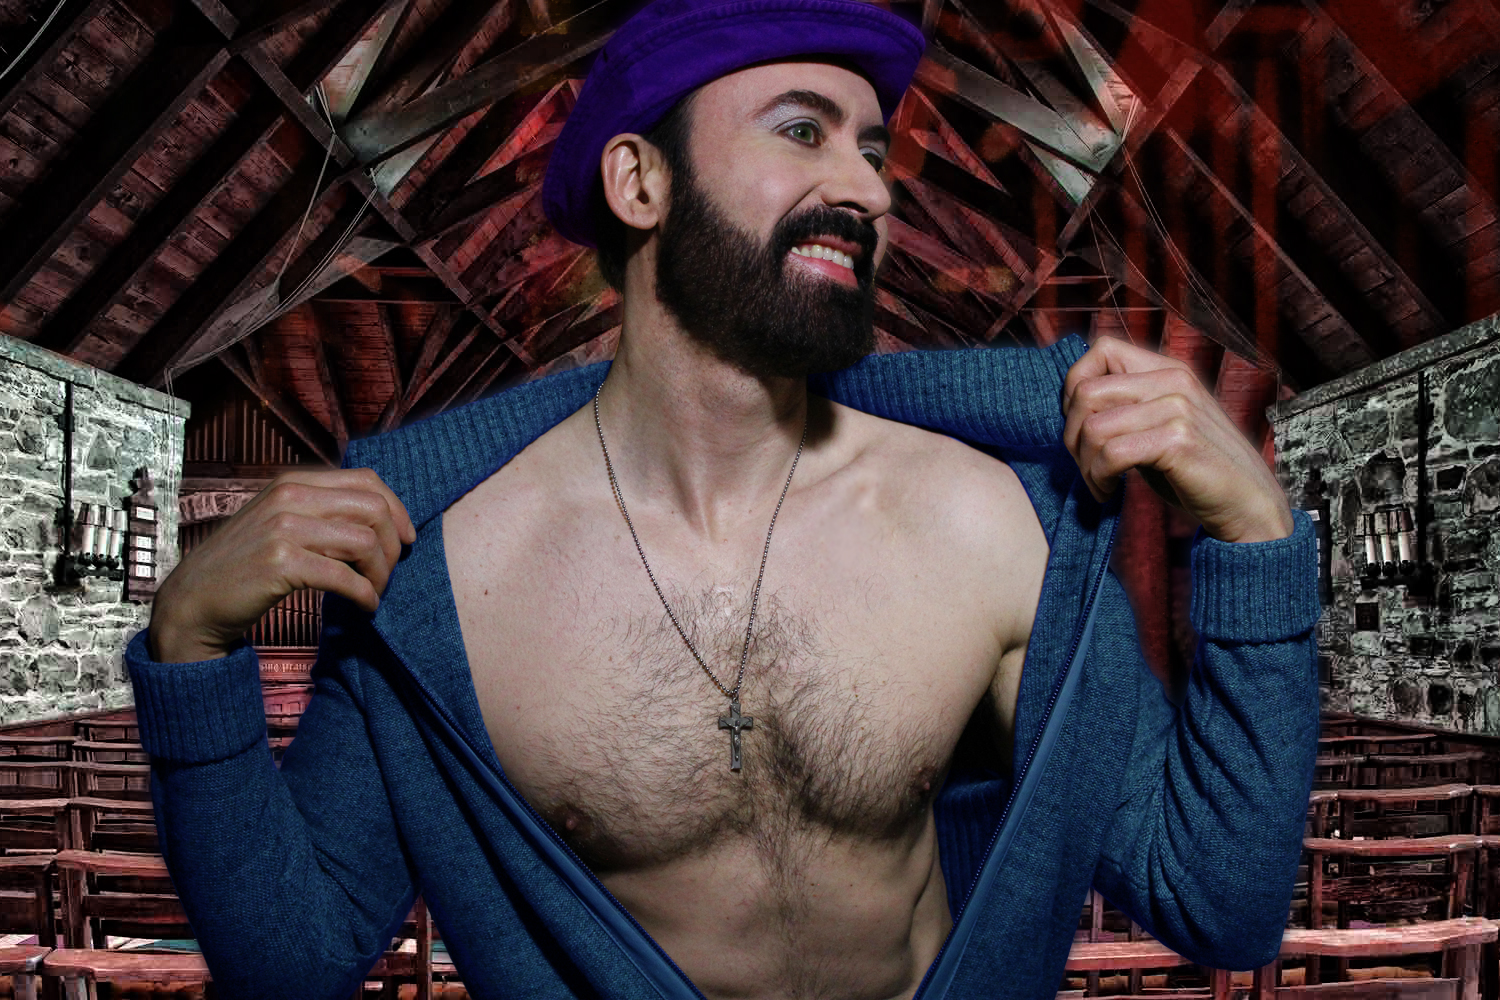 Even though life can be harsh at times, I remind myself everyday that there are plenty of reasons to smile... #HappySmile #HappyDance #ComingIn2015 #NewSeason #Beard #MoonDazeTV #LifeIsGood